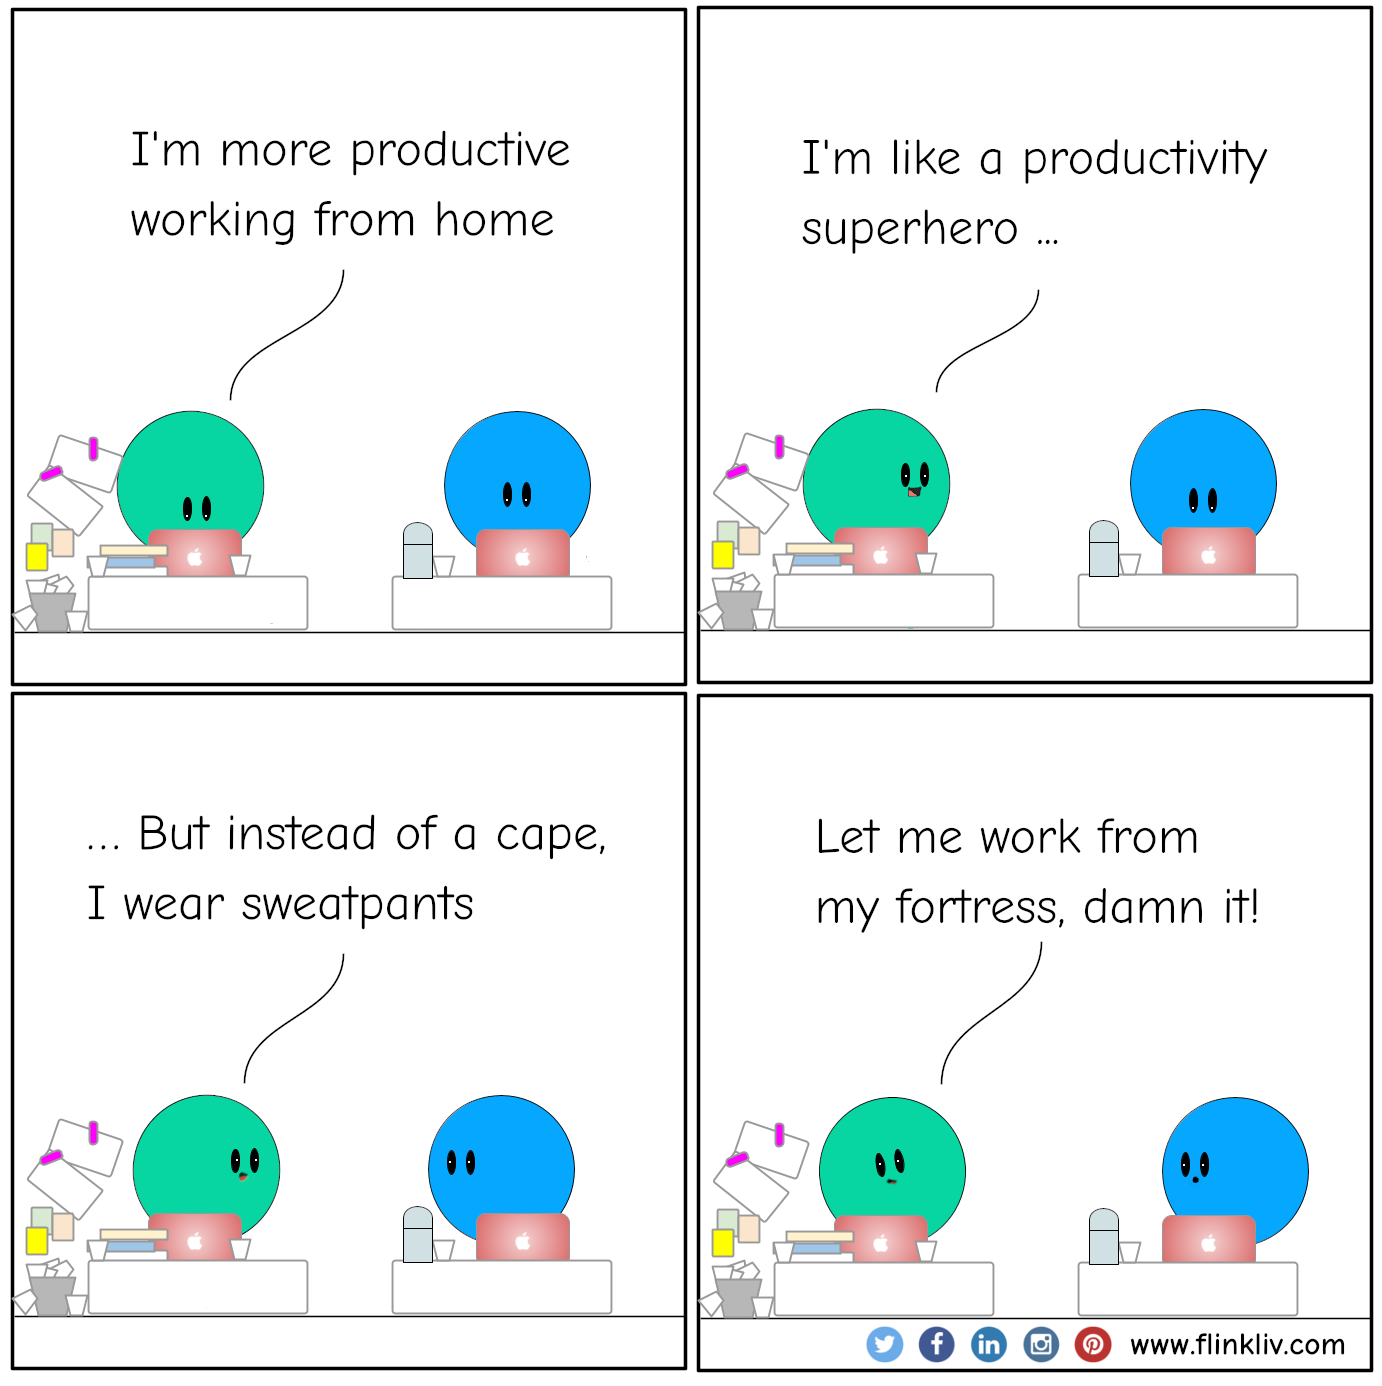 Conversation between A and B about work from home A: I'm more productive working from home. A: I'm like a productivity superhero. A: But instead of a cape, I wear sweatpants A: Let me work from my fortress, damn it! By flinkliv.com